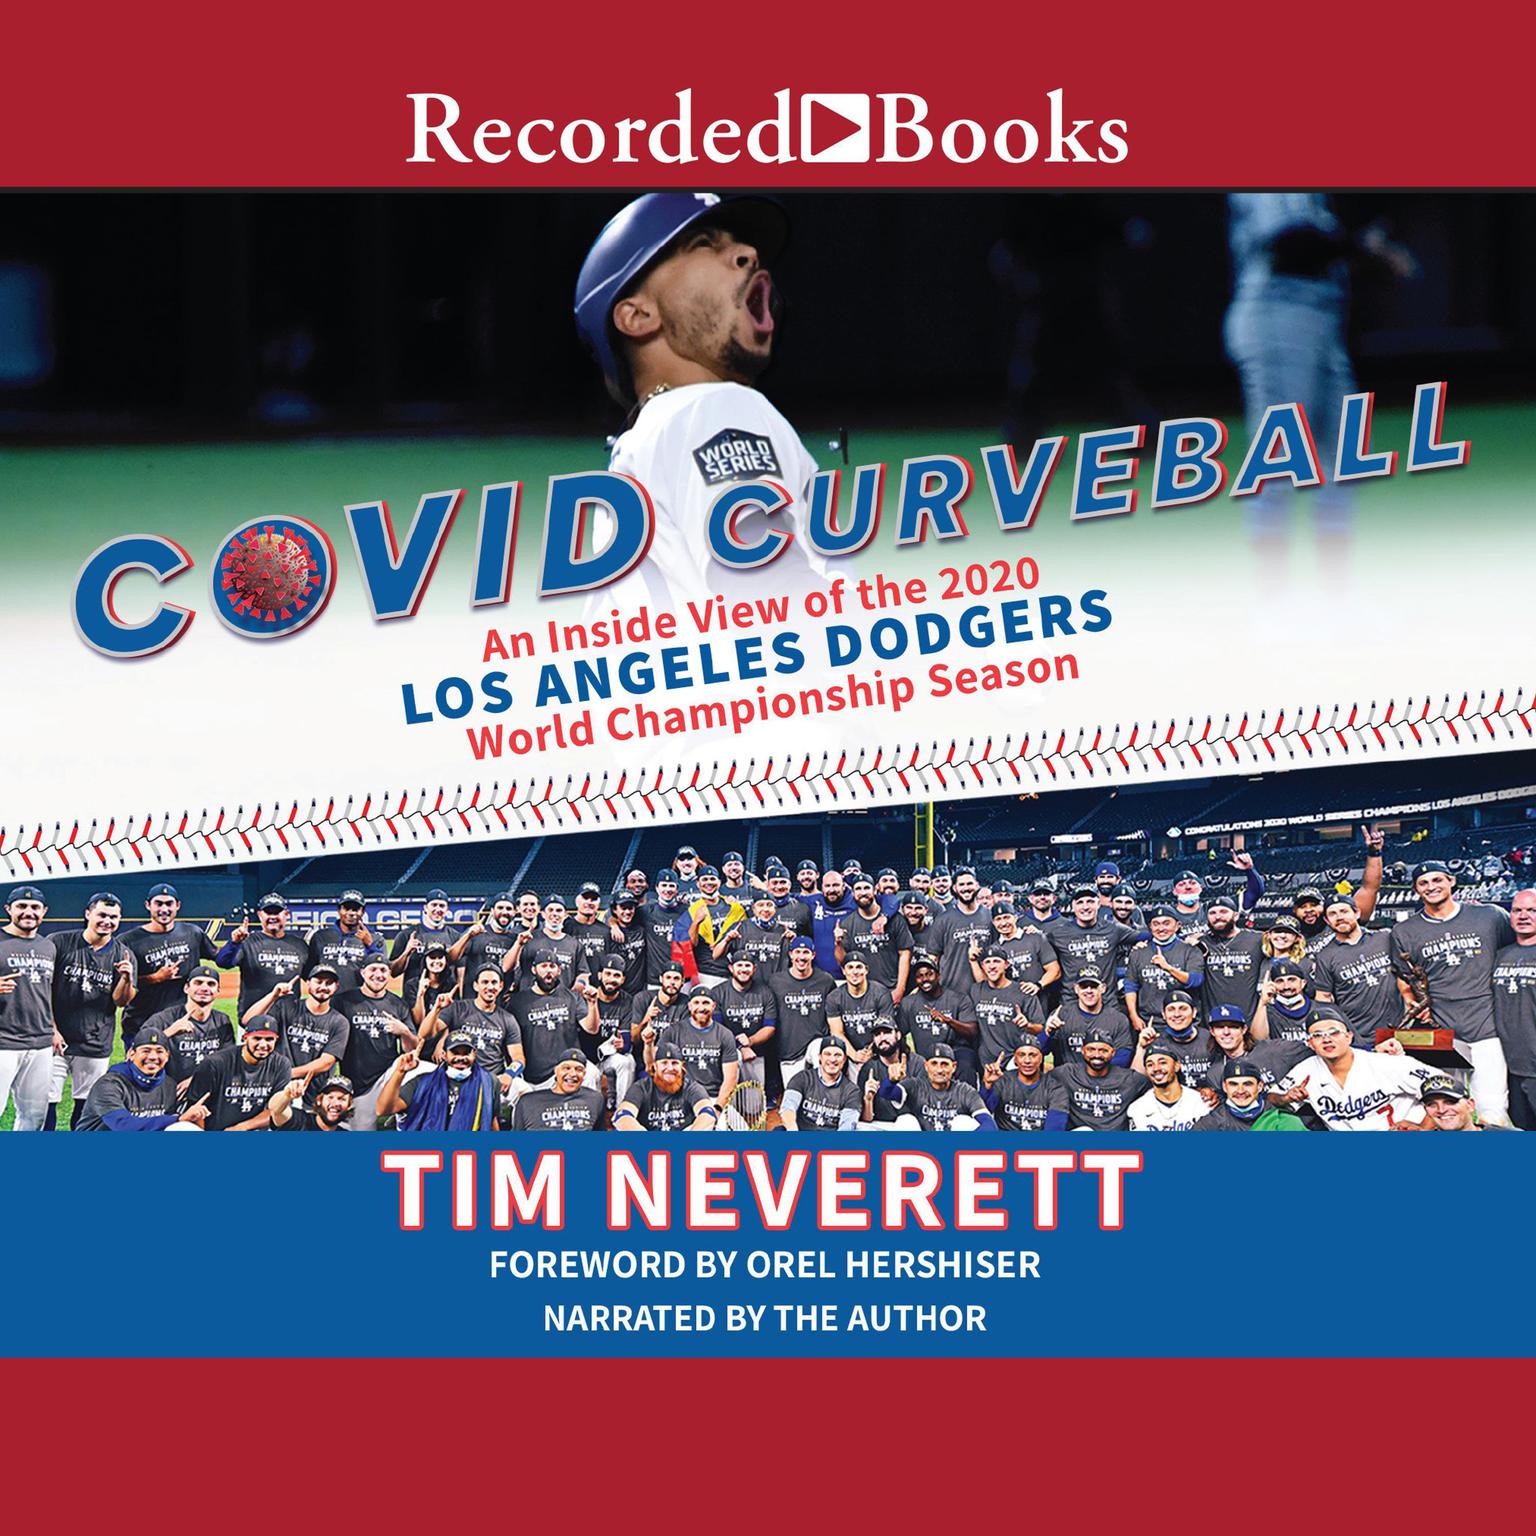 COVID Curveball: An Inside View of the 2020 Los Angeles Dodgers World Championship Season Audiobook, by Tim Neverett